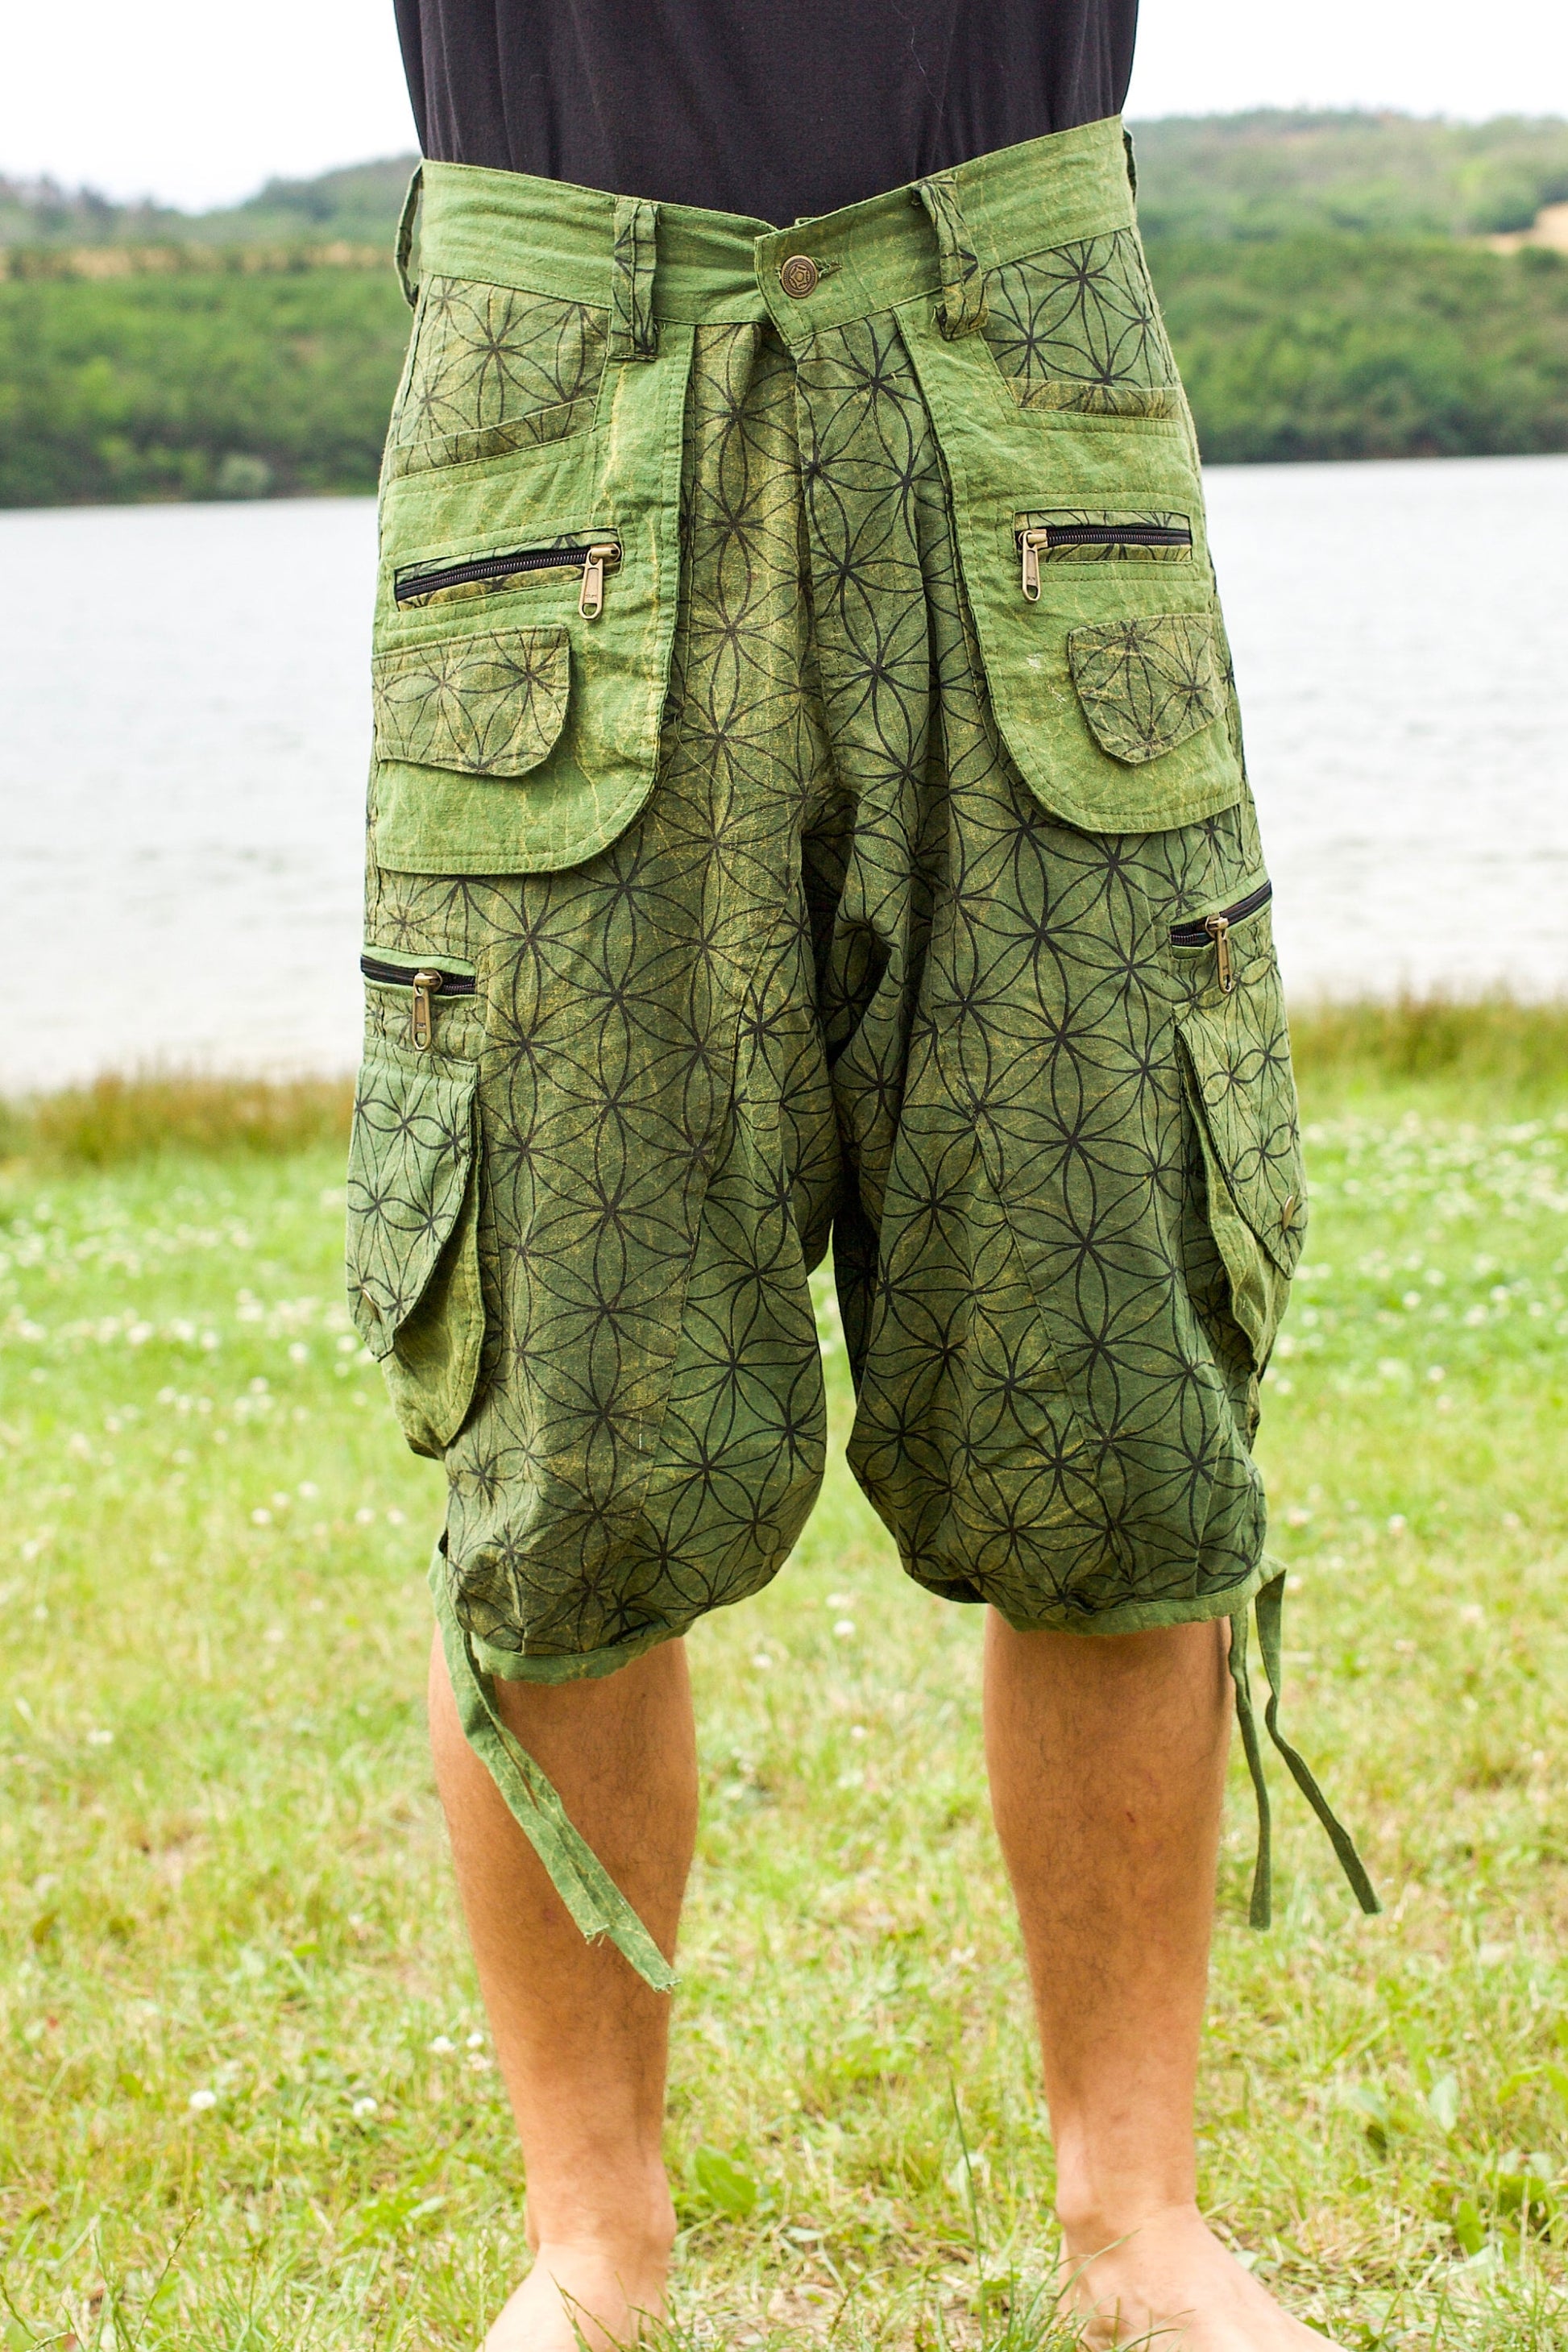 Green Flower of Life Pants - sacred geometry pattern shorts - 9 pockets handmade long and short pants  size adjustable with 2 buttons